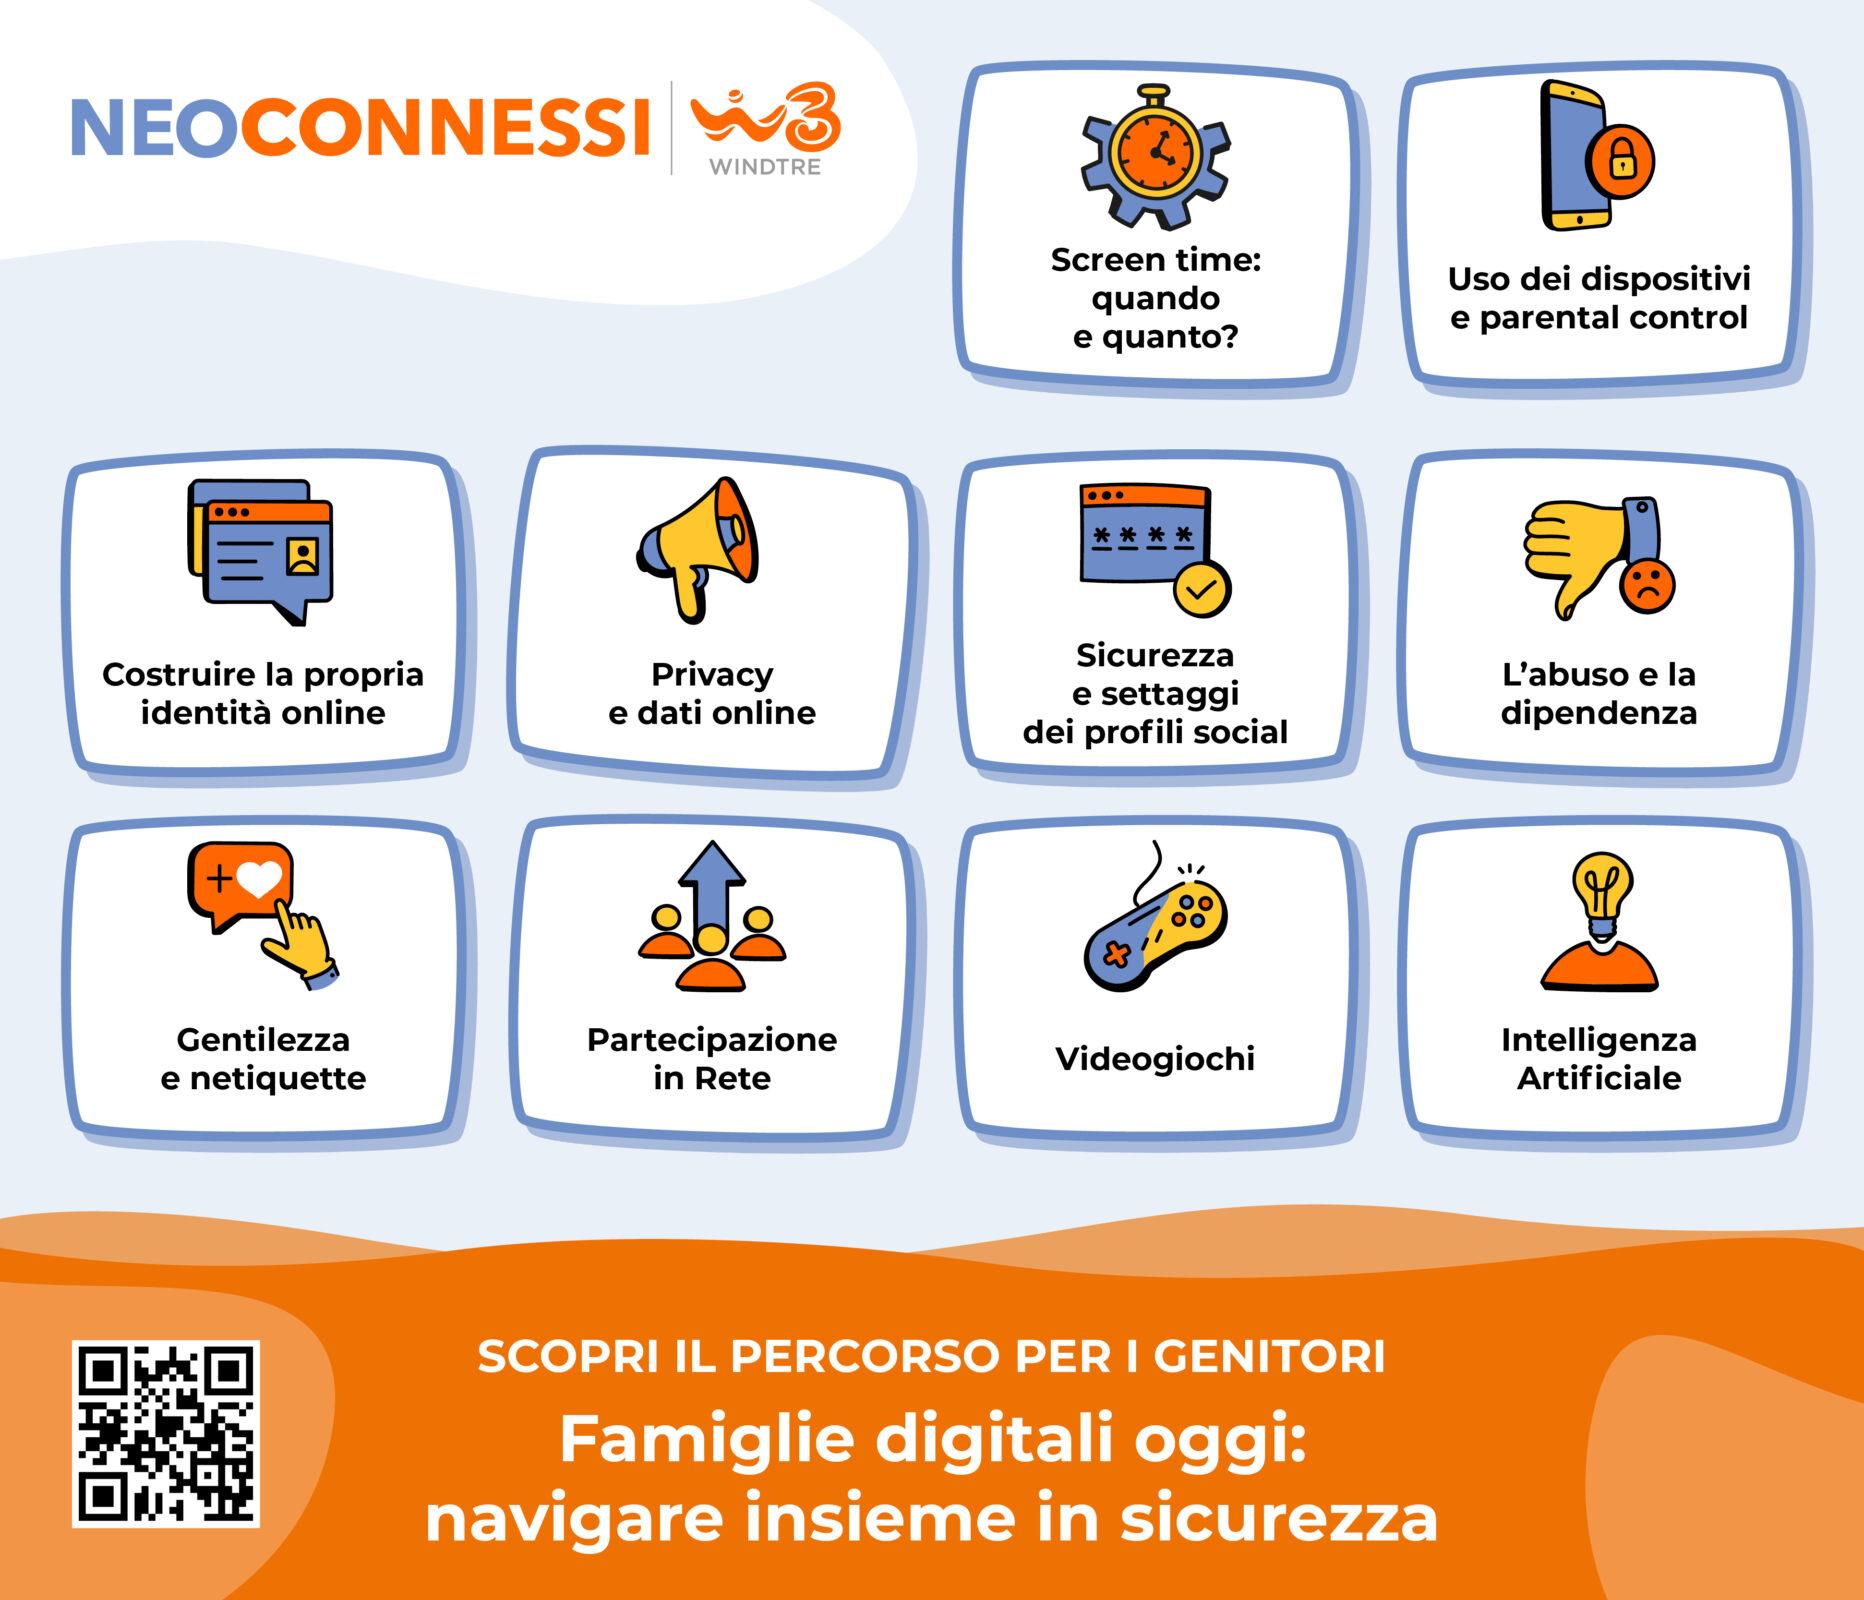 NeoConnessi Decalogue within the observe of Italian pediatricians, SIP collaboration